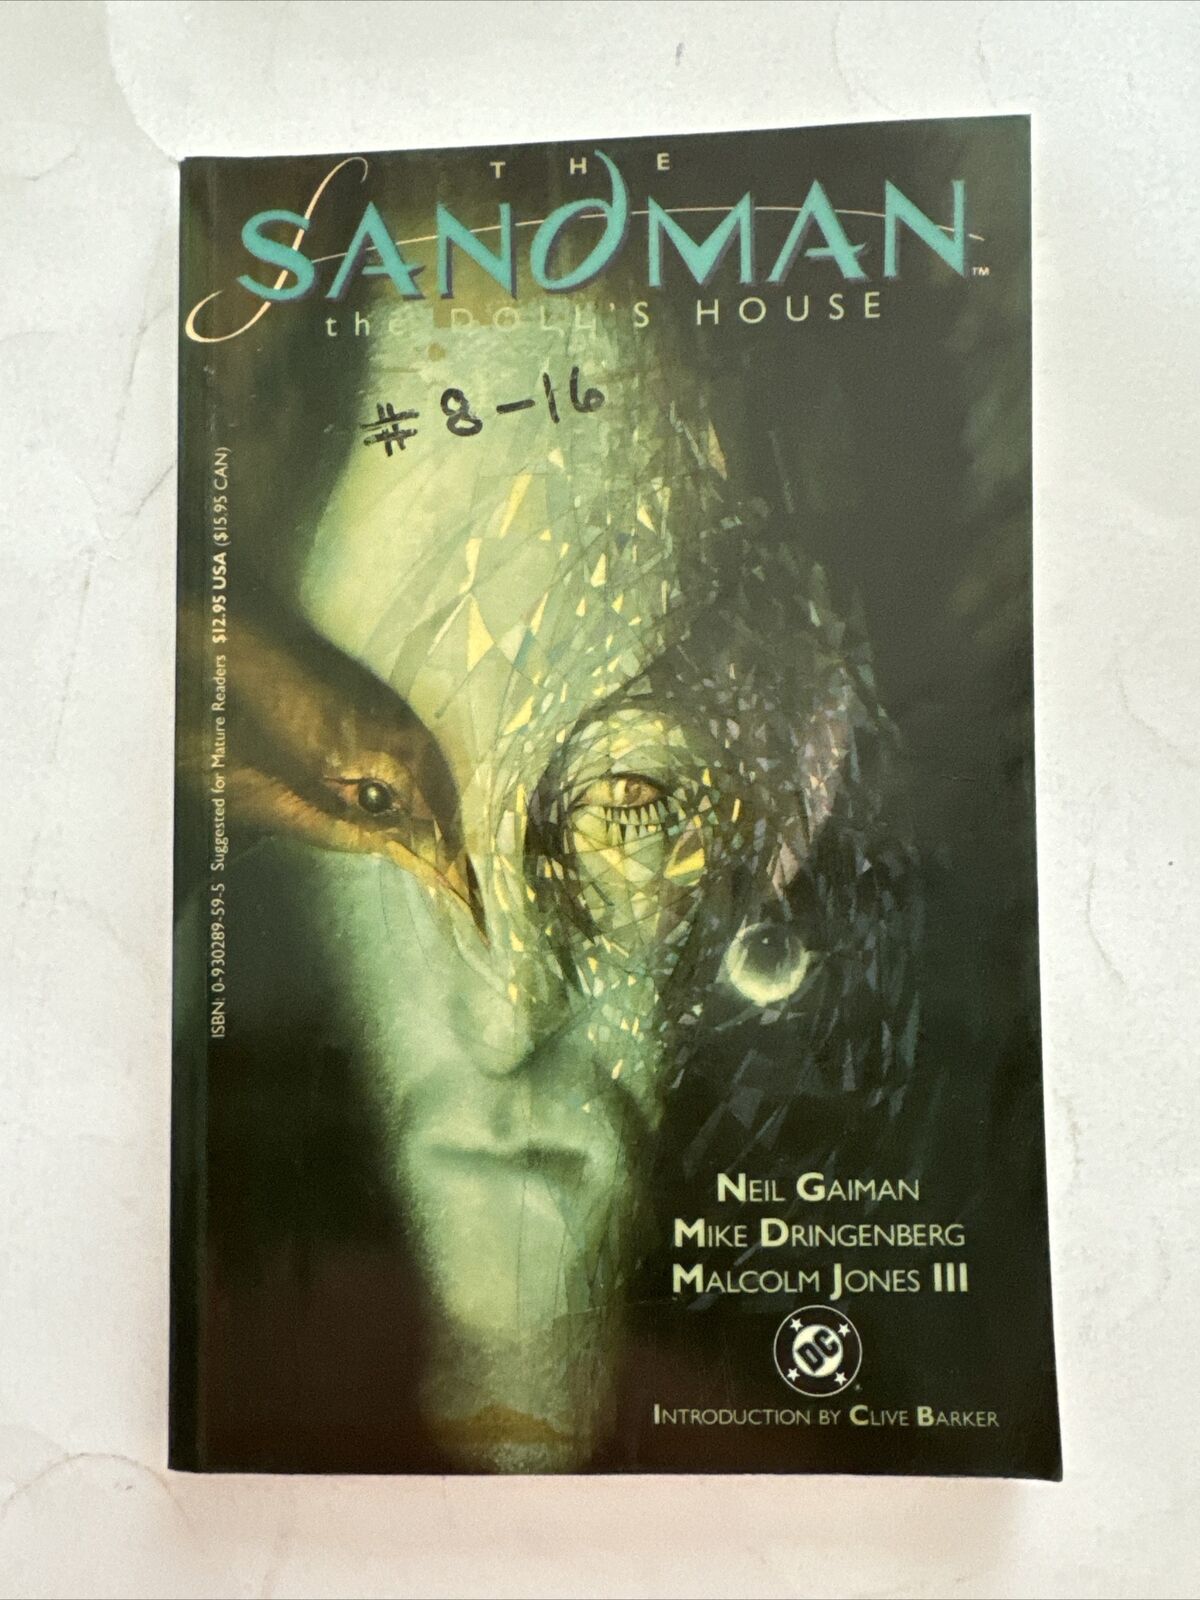 The SANDMAN “The Dolls House” DC Soft Cover #8-16  Writing On Cover